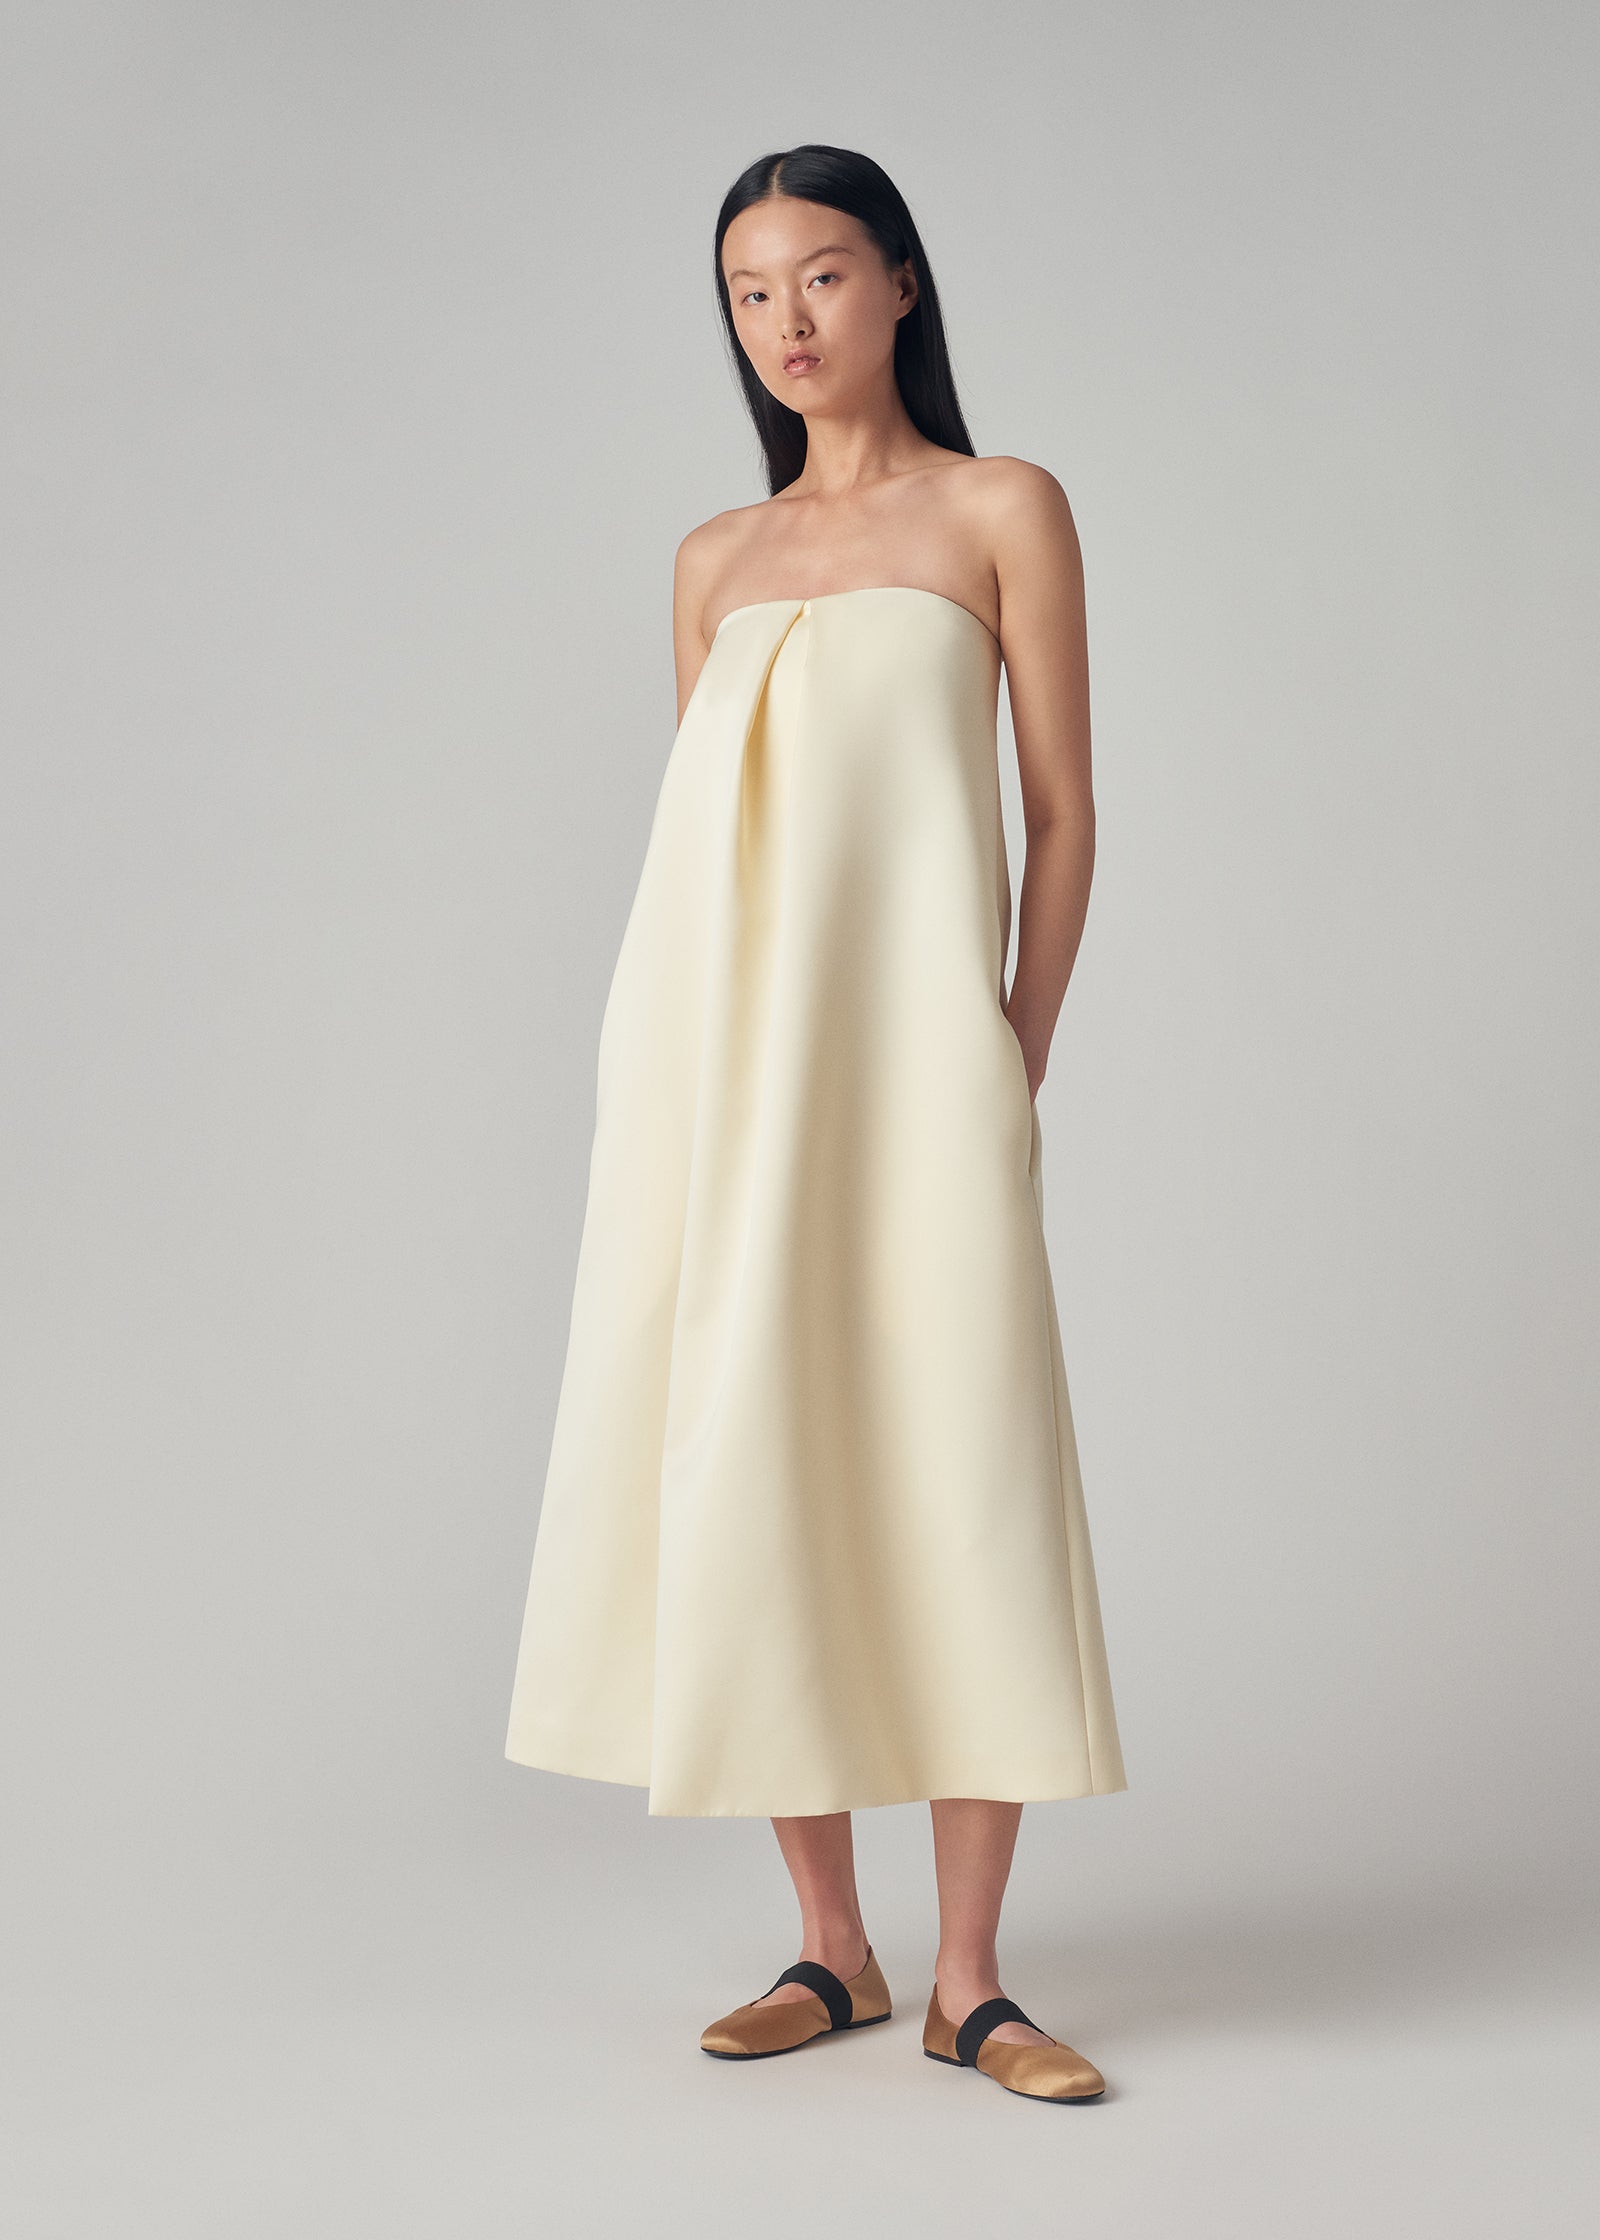 Bustier Midi Dress in Duchess Satin - Ivory - CO Collections